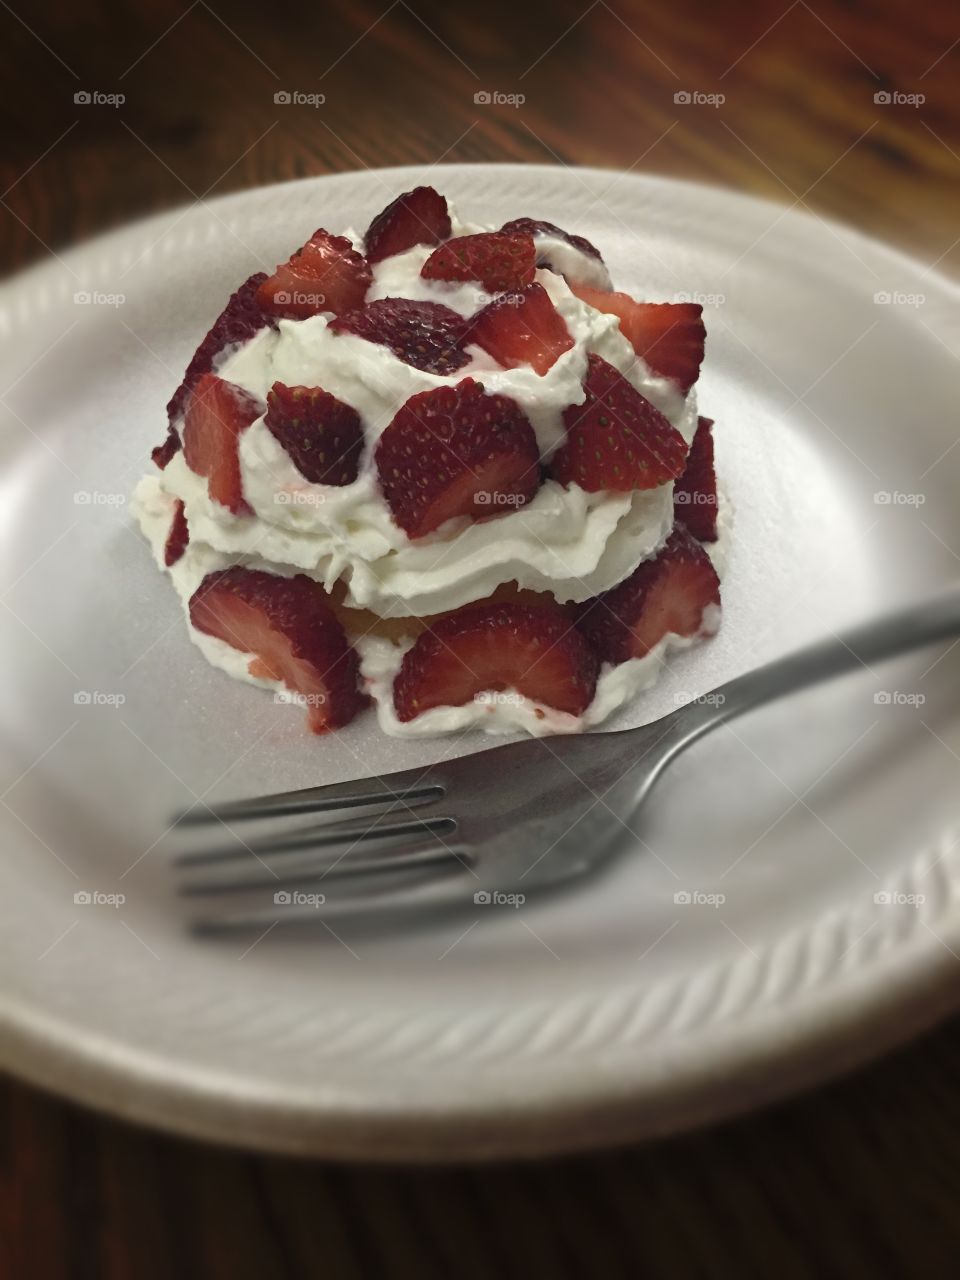 Just Desserts. This was a delicious dessert made by myself. It is a shortbread cake topped with whip cream and strawberries. 